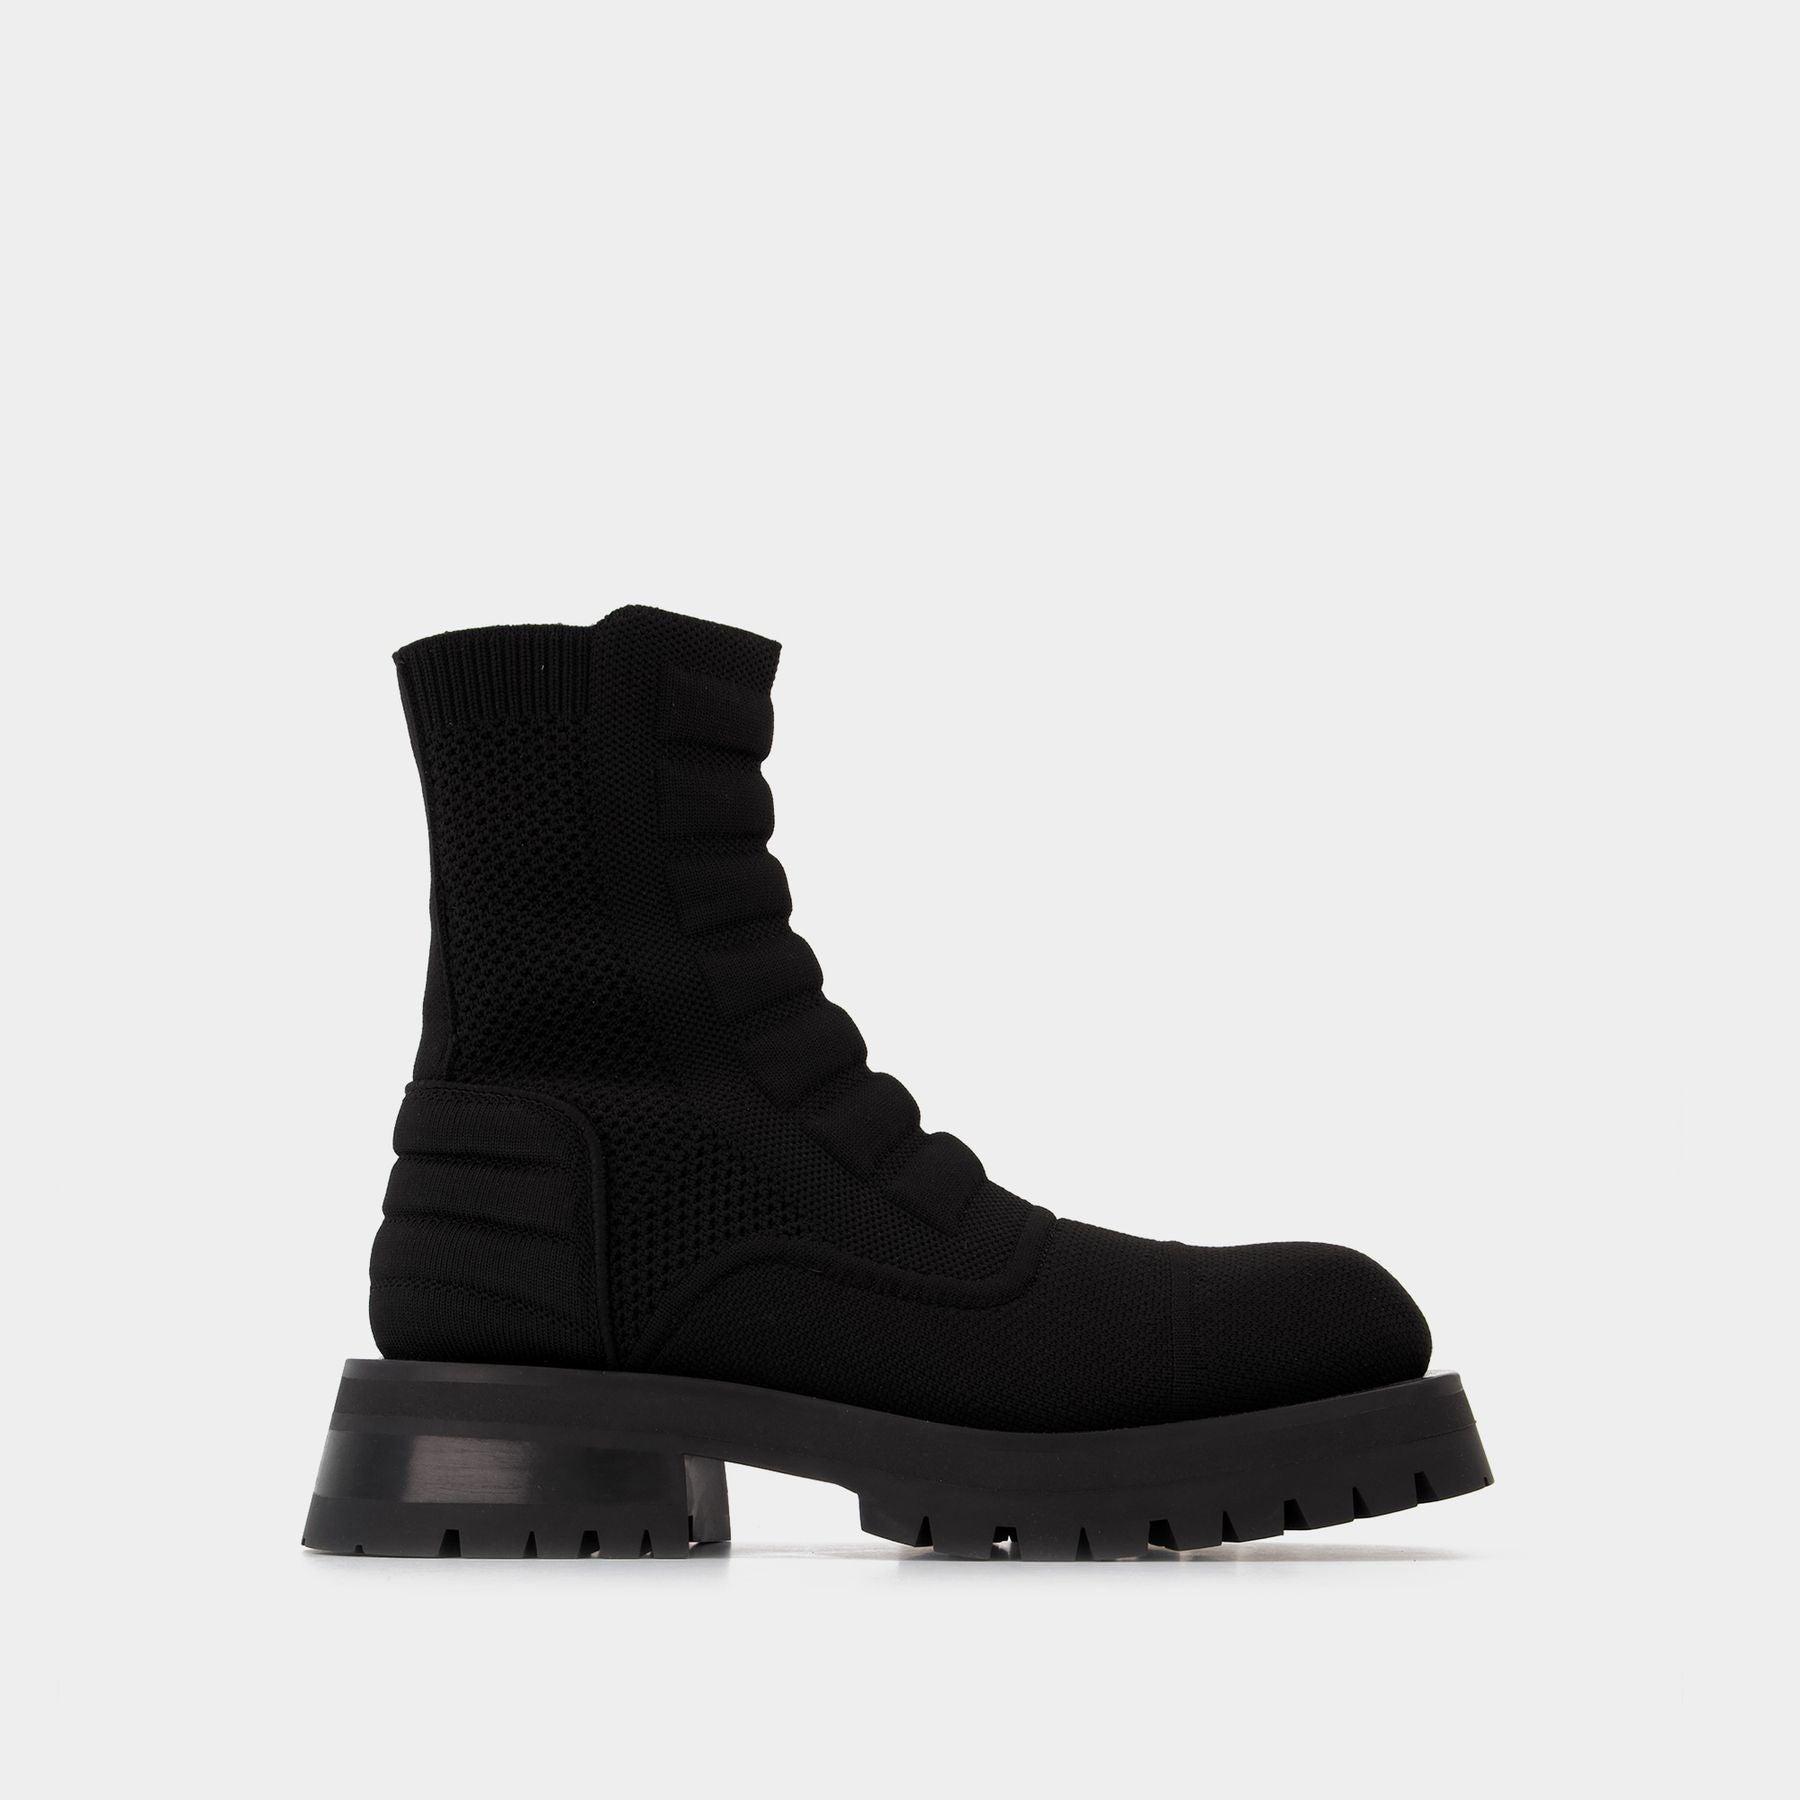 Balmain Army Knit Chelsea Boots in Black | Lyst